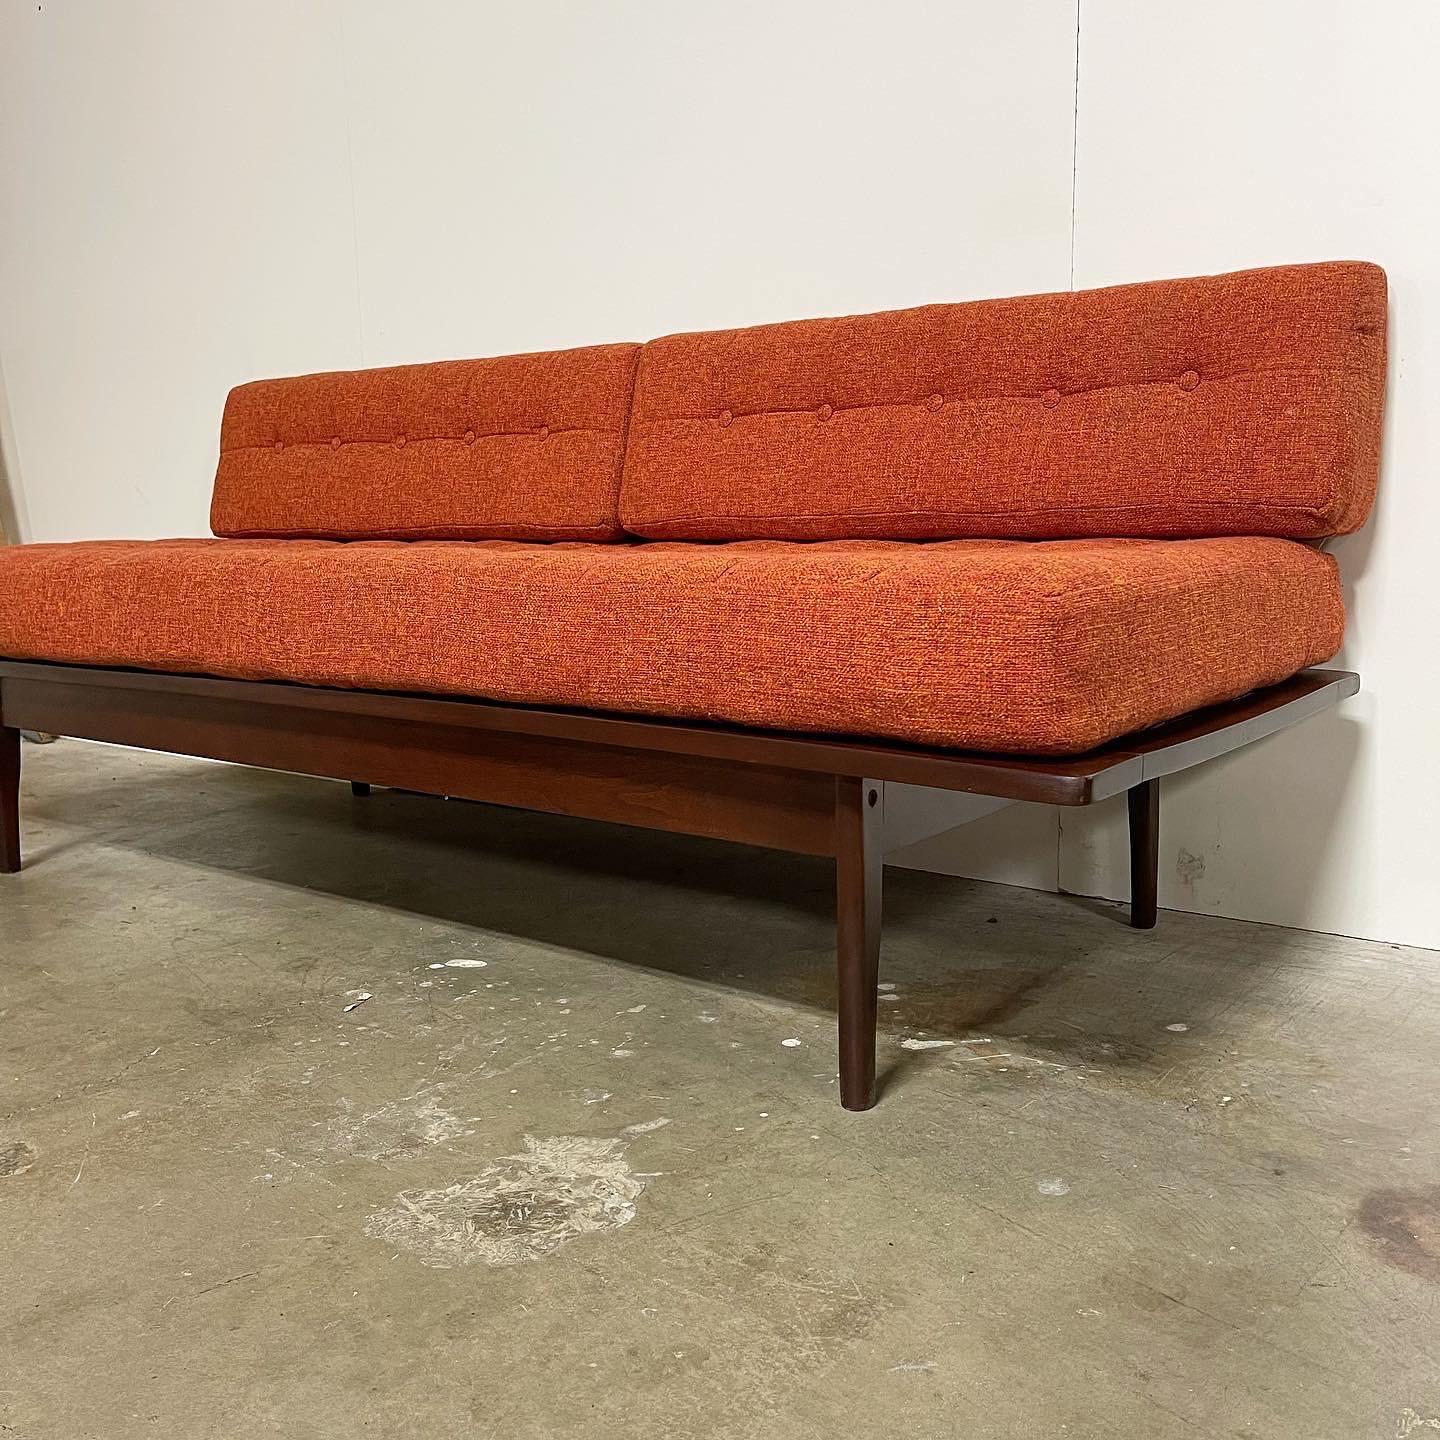 Amazing Mid Century Daybed. 1960’s. This piece is in incredible condition through and through. Vintage Orange tweed new upholstery. The foam in the seat cushion and back rests are brand new and offer a medium density comfort. All buttons are nice